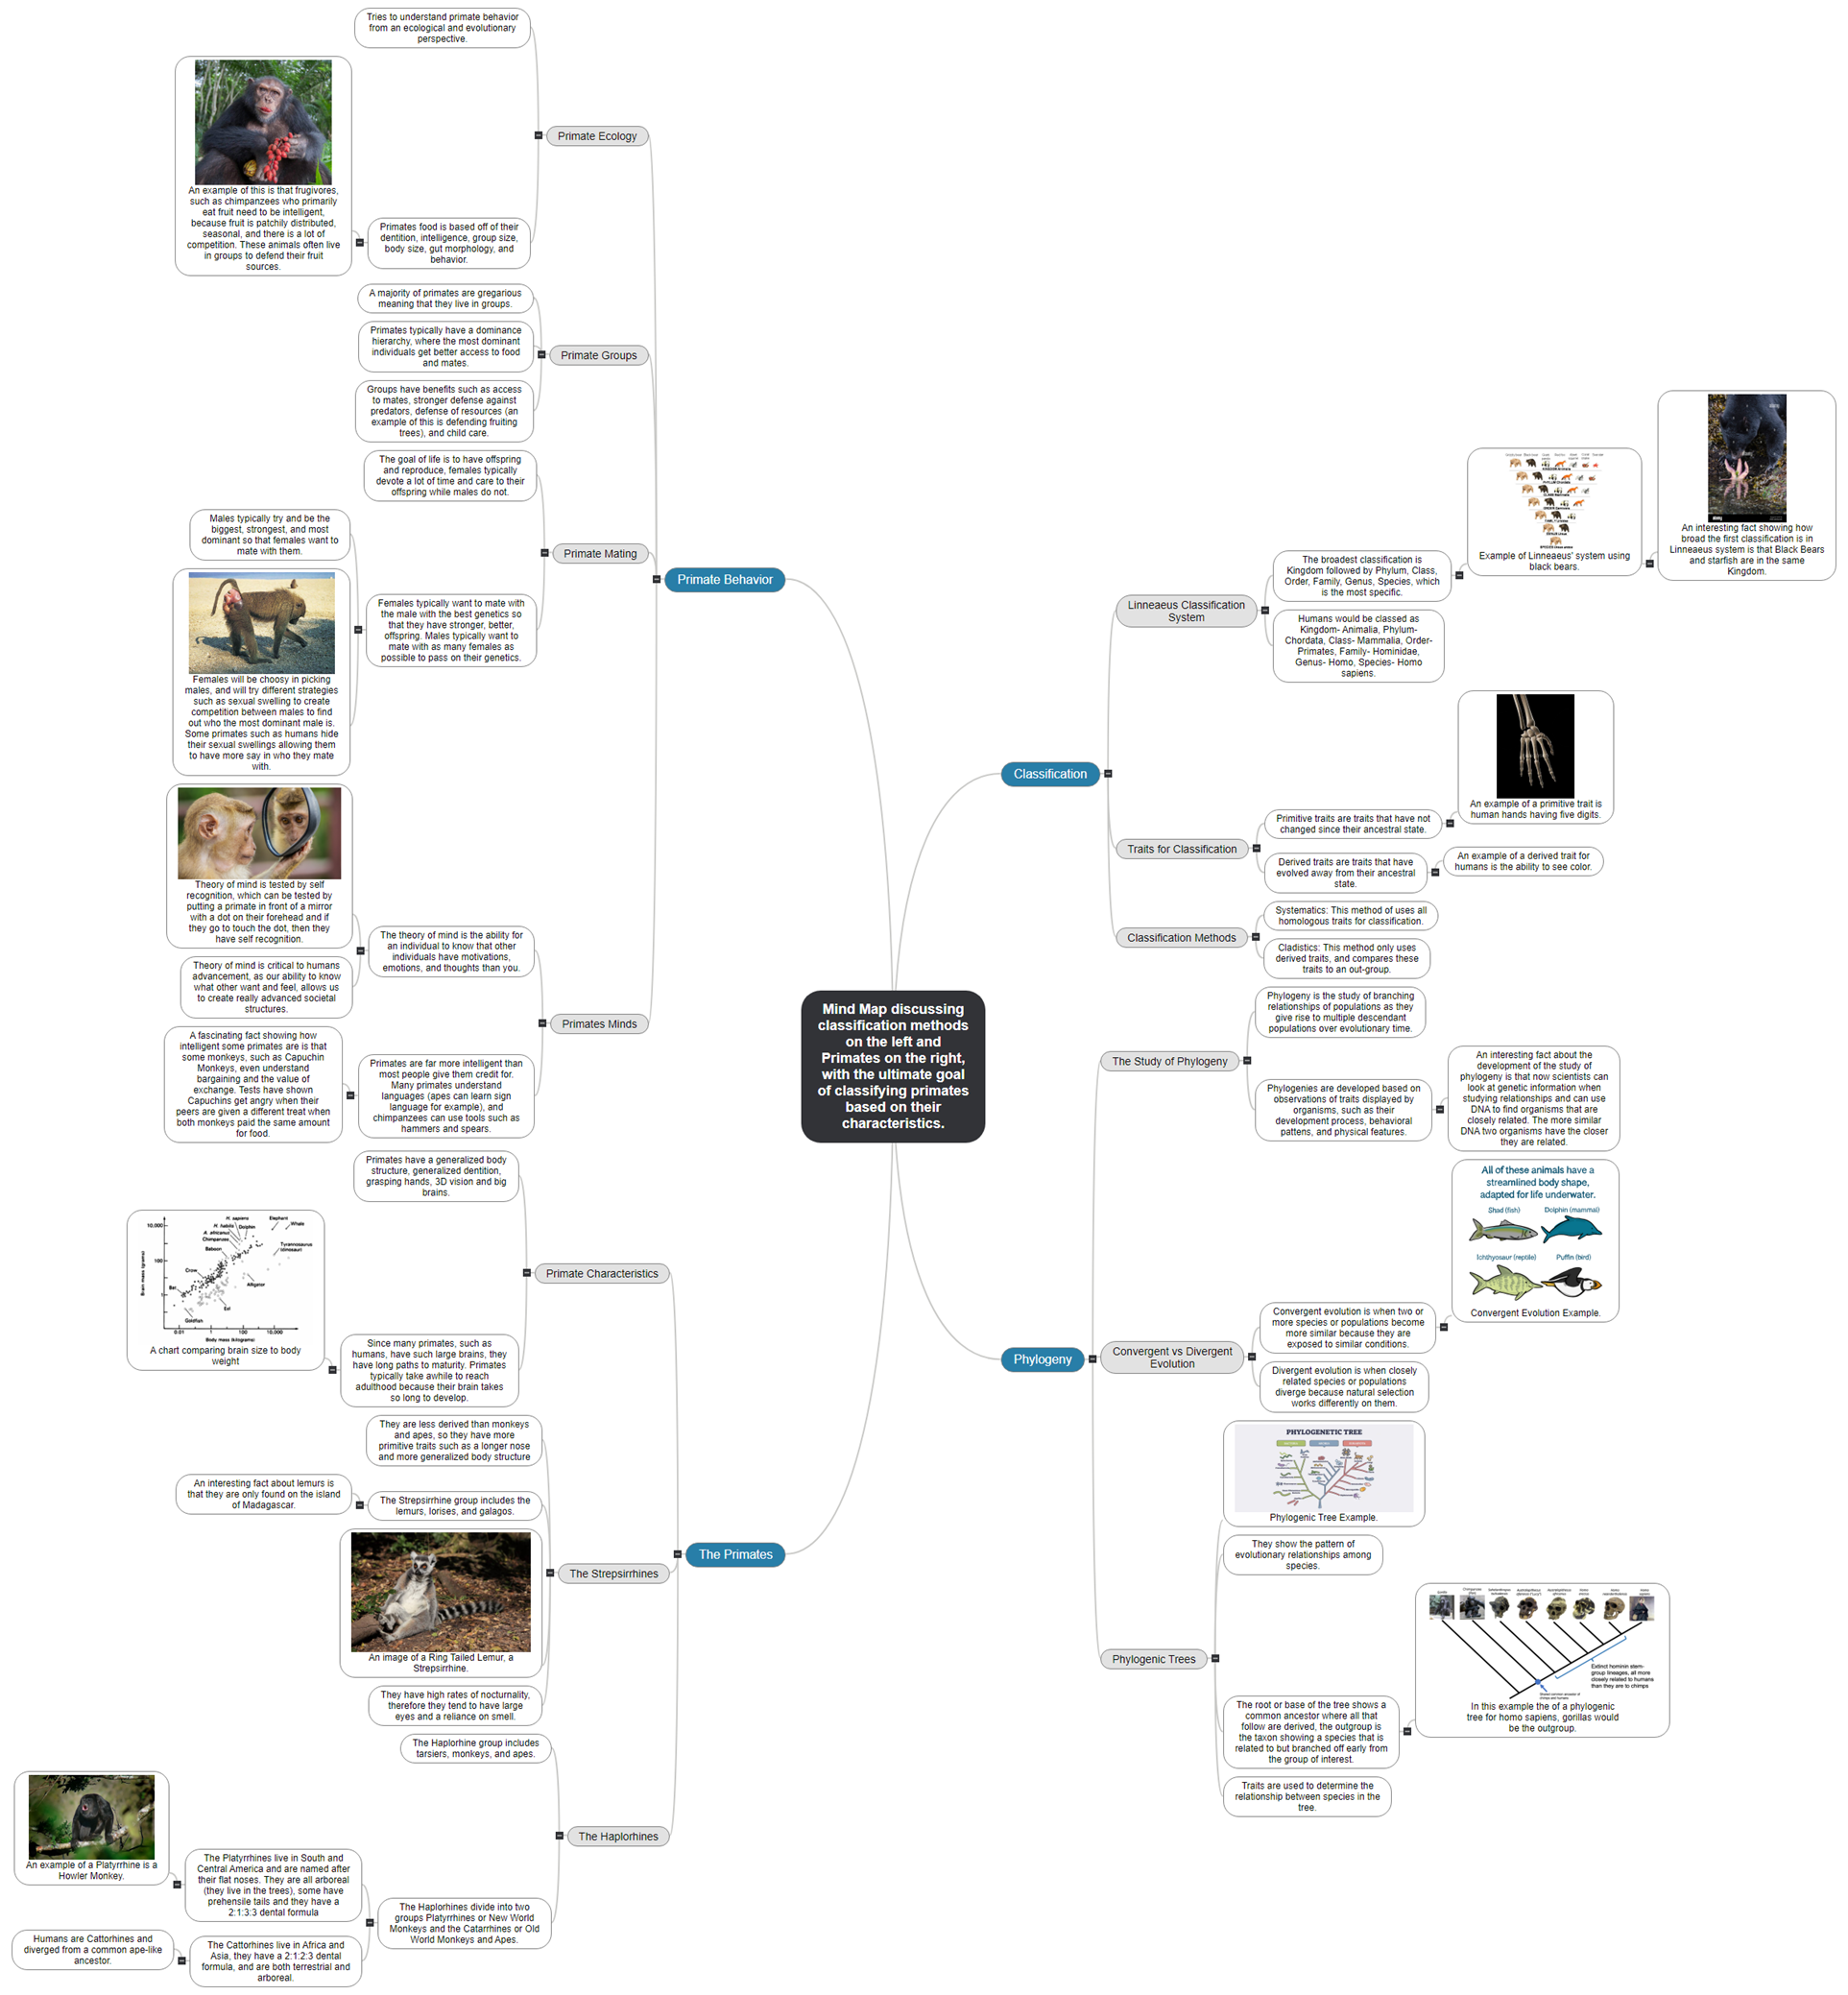 Mind Map discussing classification methods on the left and Primates on the right, with the ultimate goal of classifying primates based on their c Mind Map